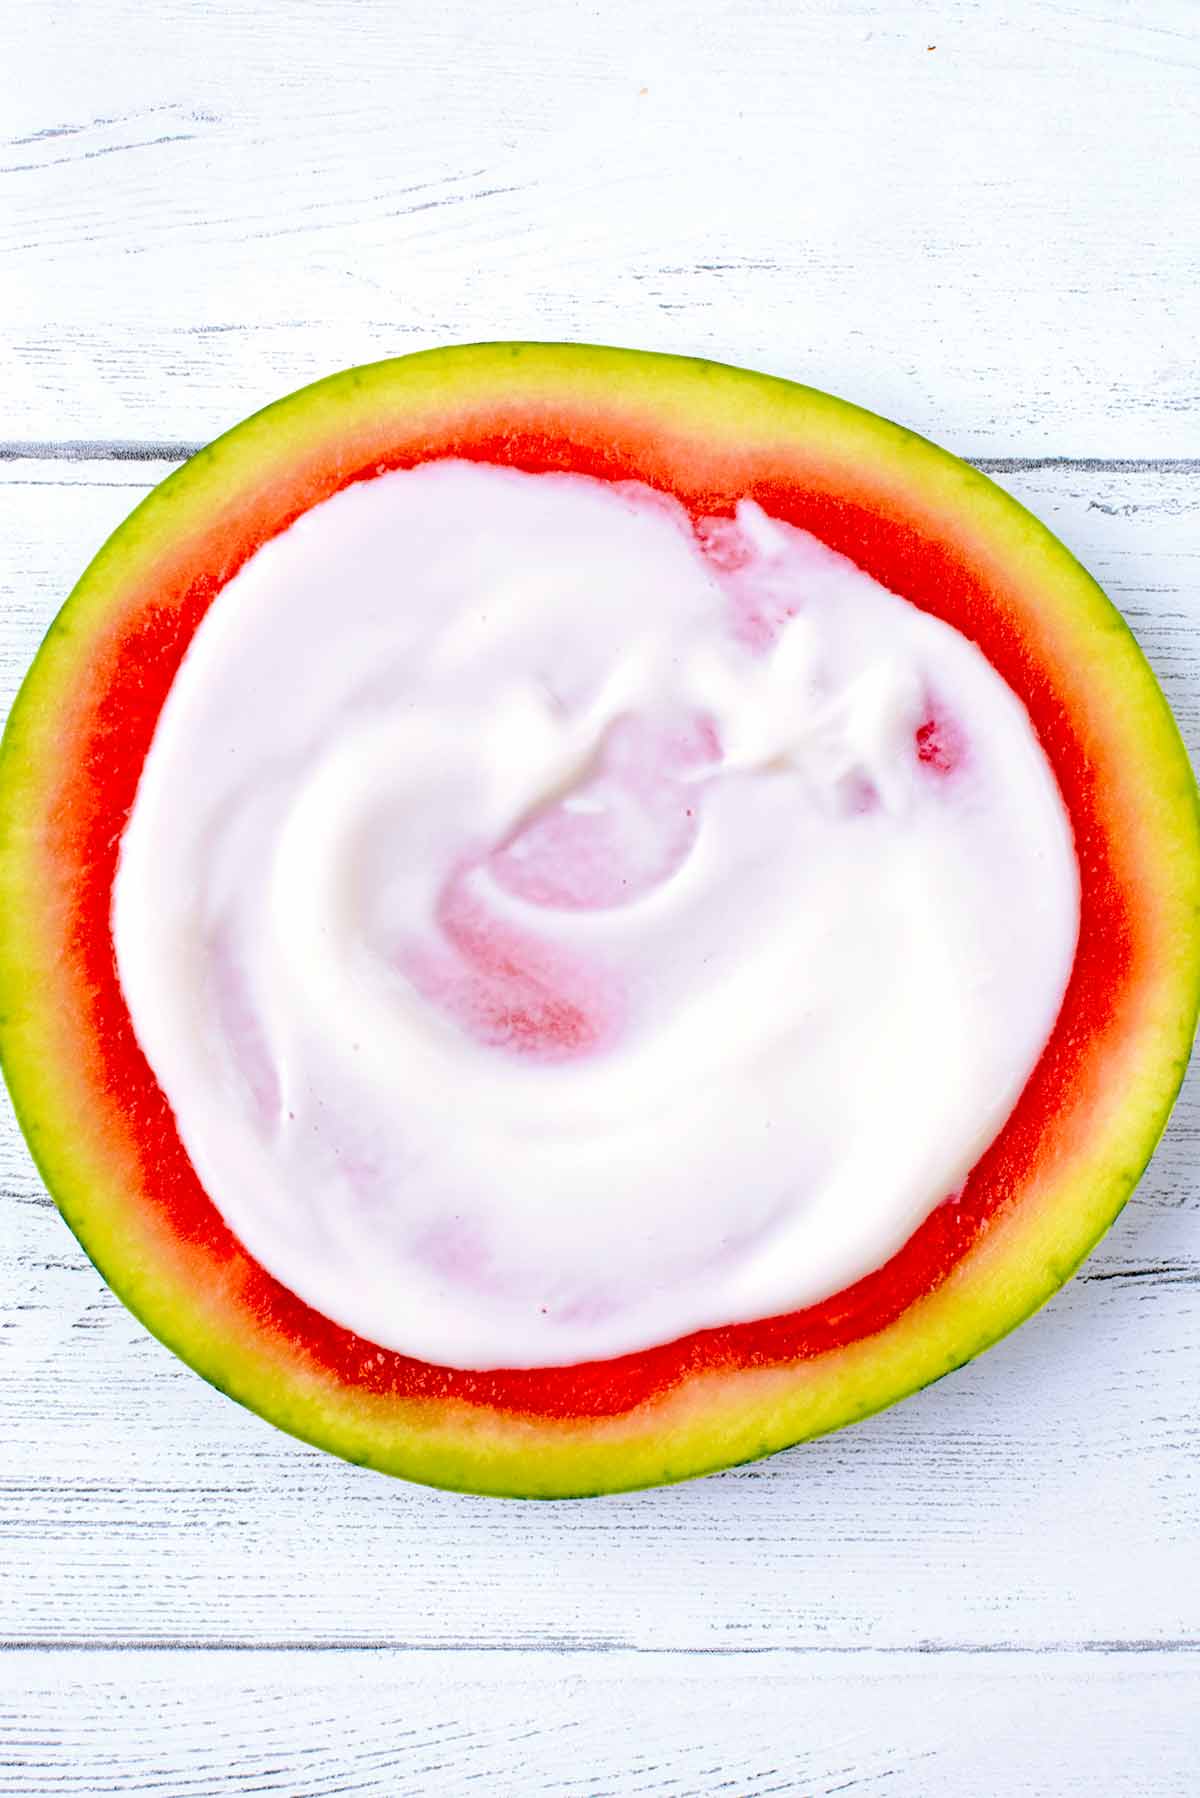 A round slice of watermelon with yogurt spread over it.